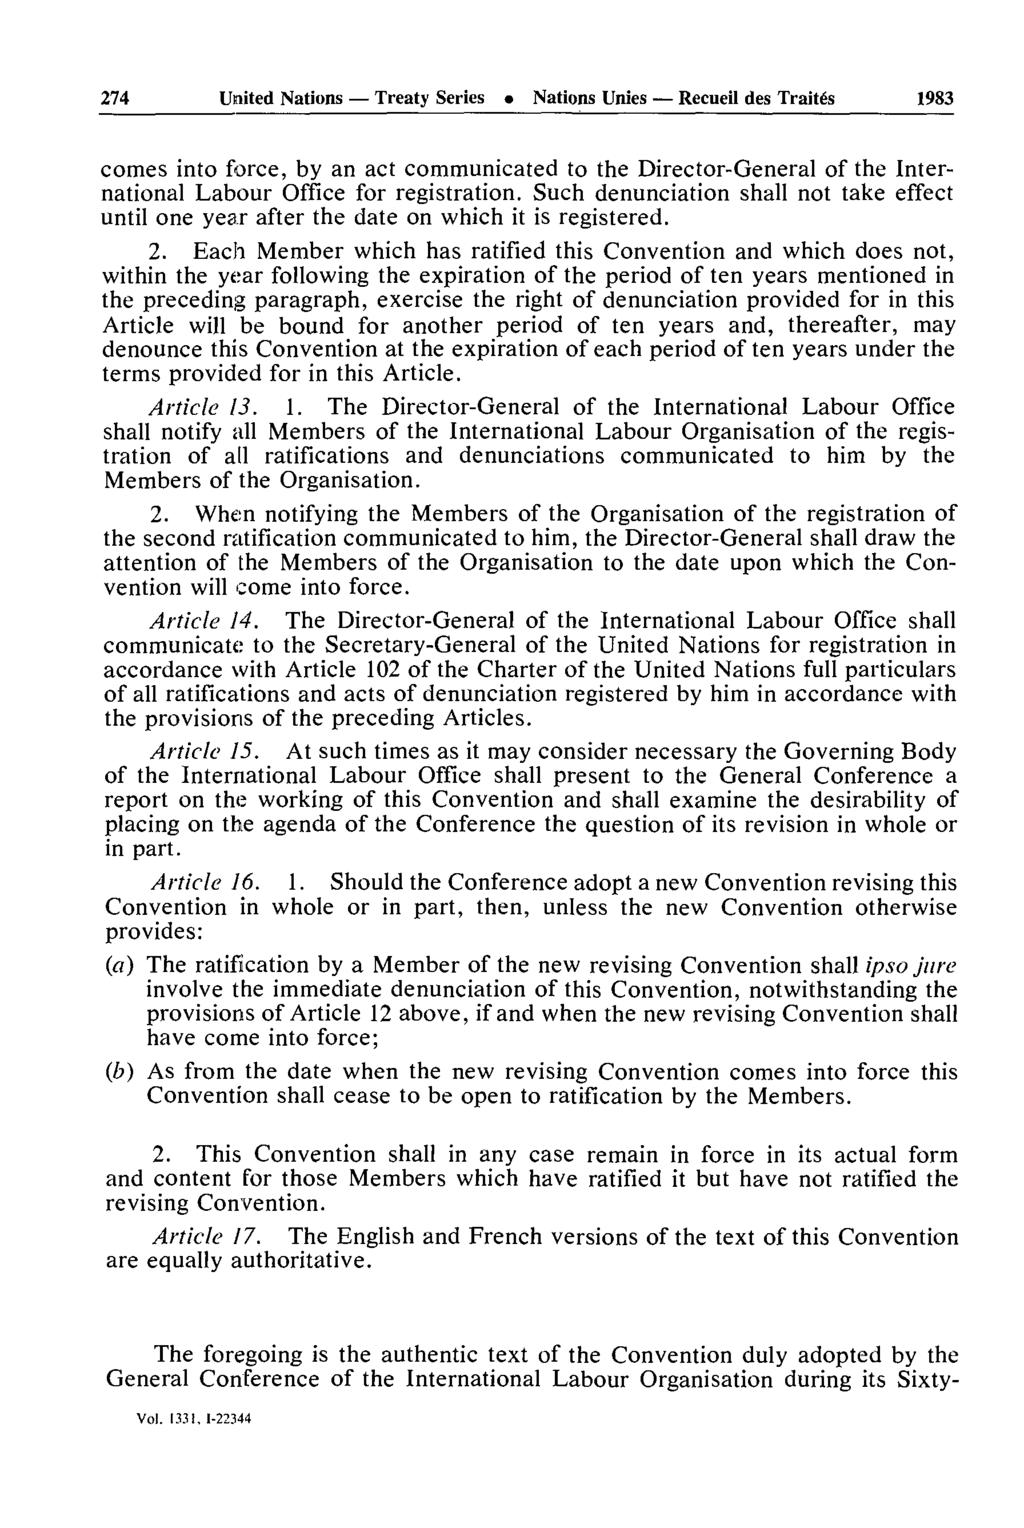 274 United Nations Treaty Series Nations Unies Recueil des Traités 1983 comes into force, by an act communicated to the Director-General of the Inter national Labour Office for registration.